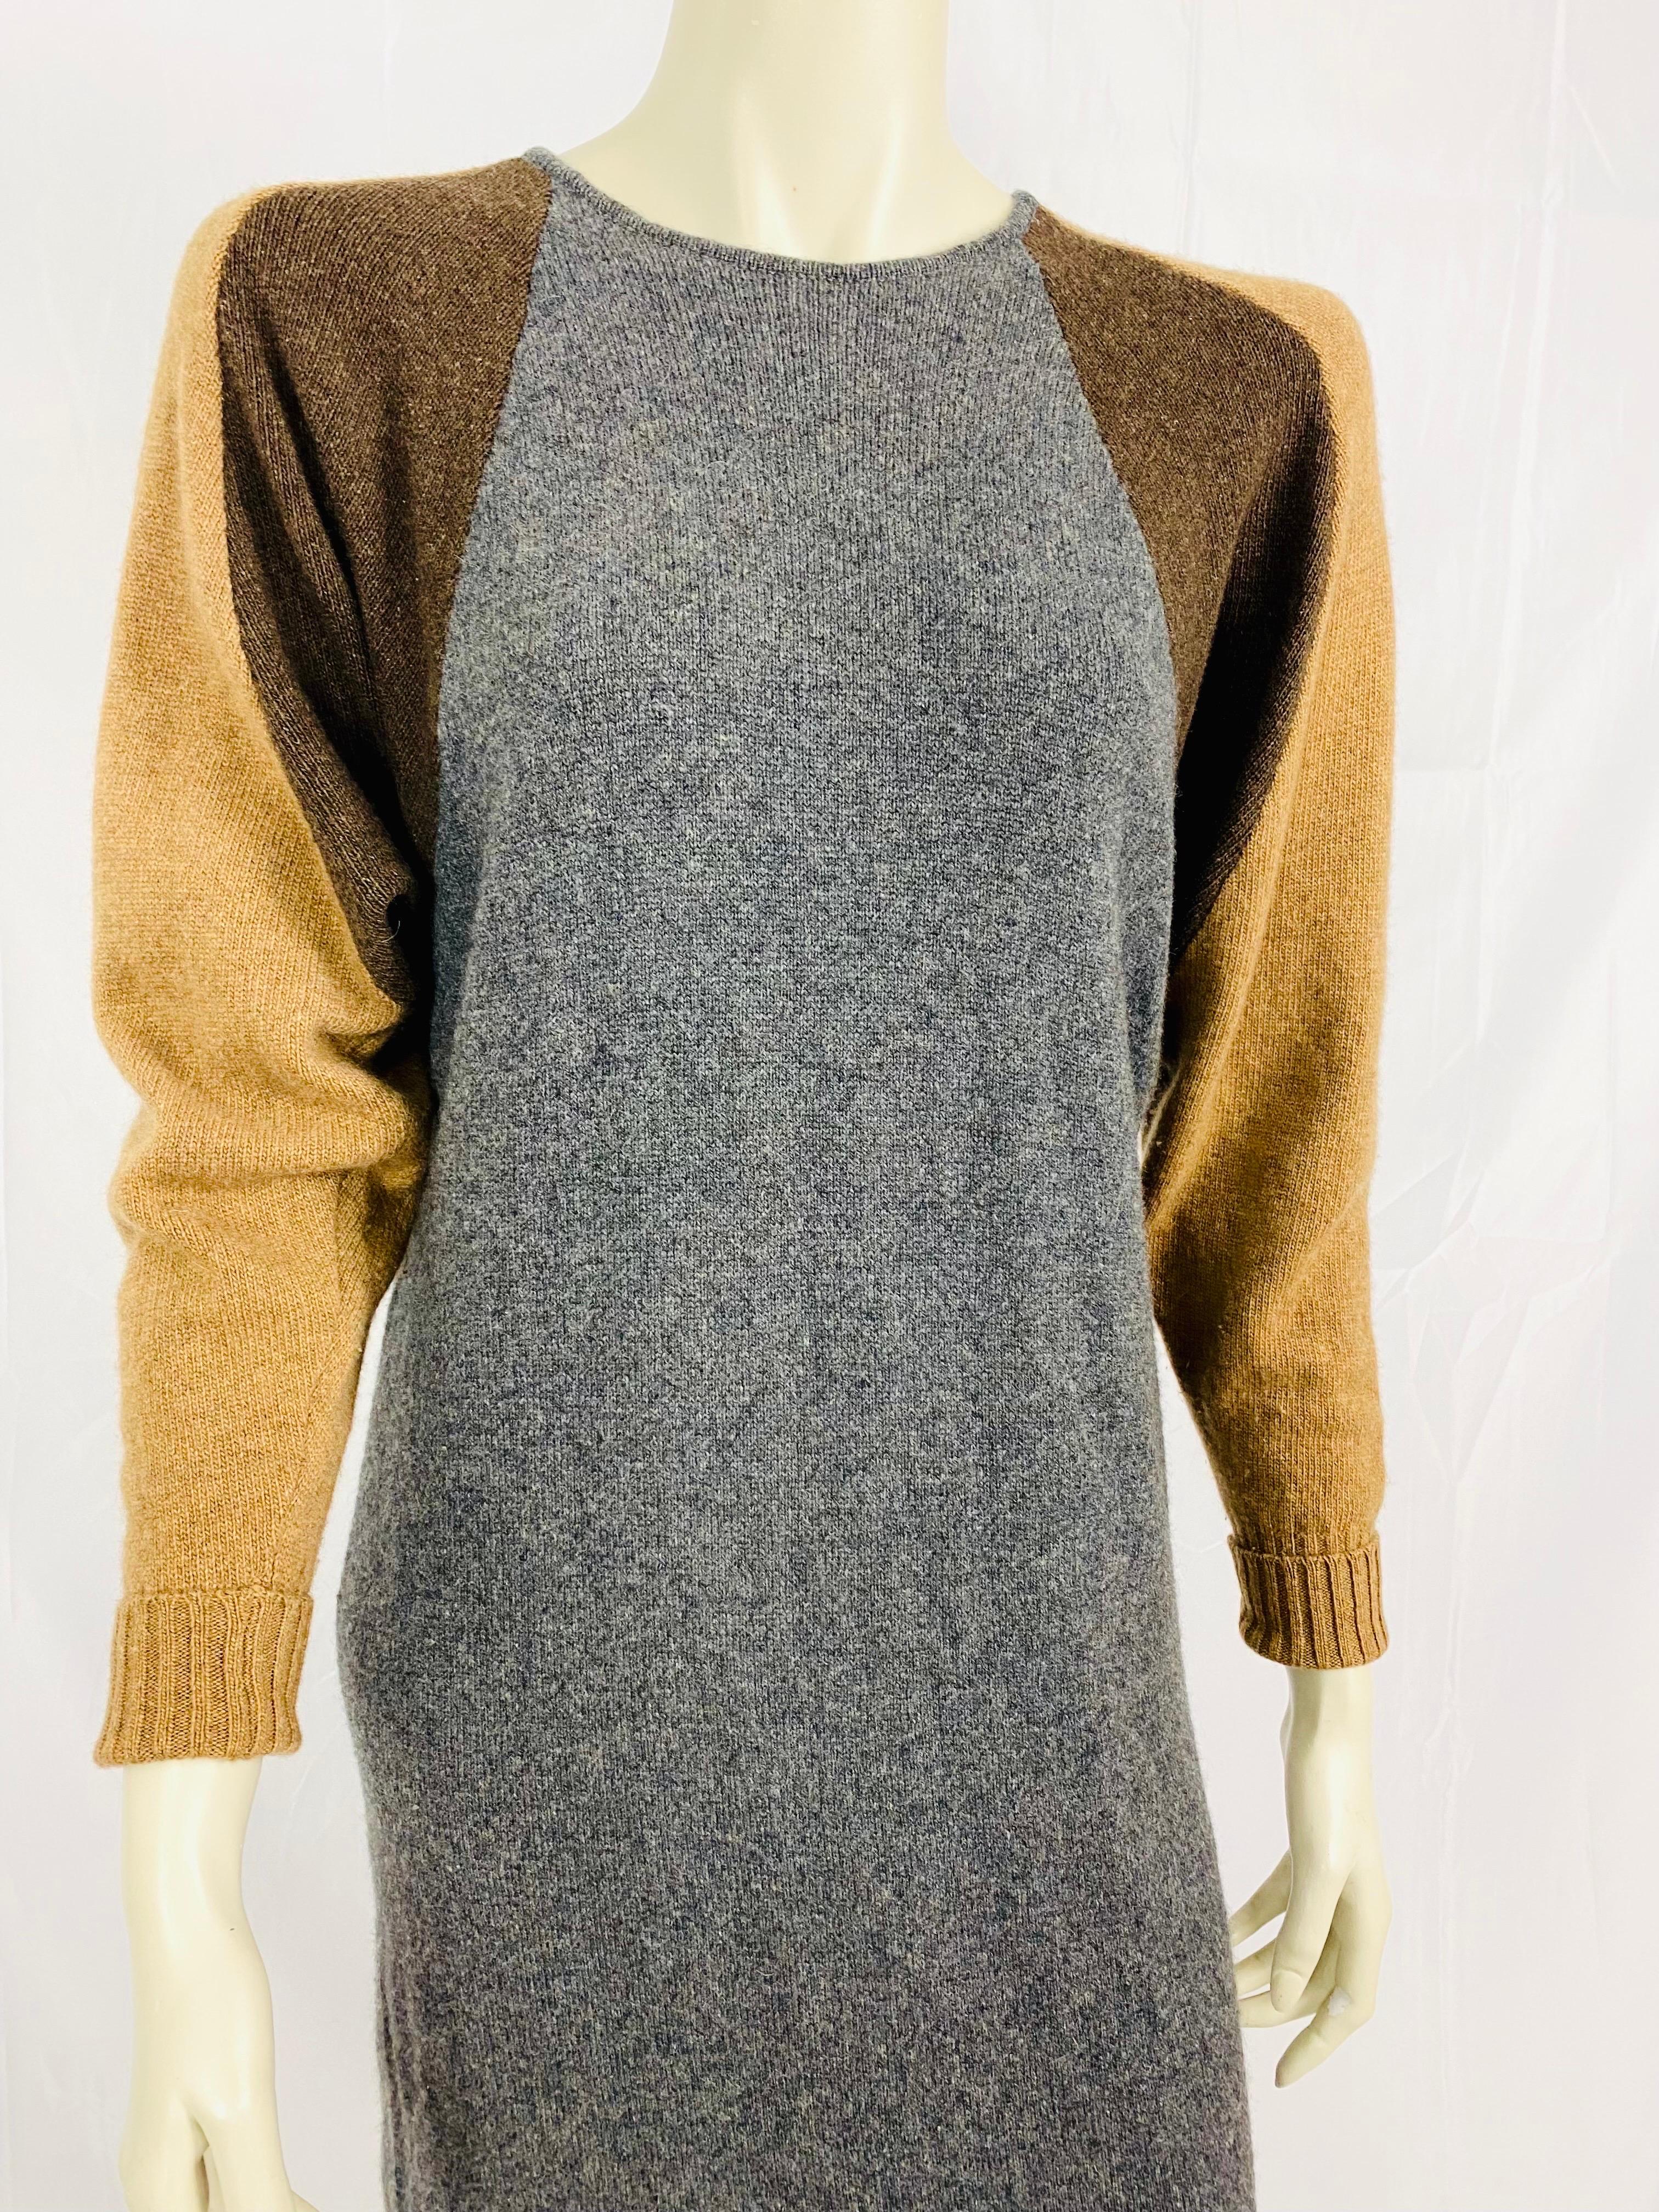 Black Vintage Issey Miyake cashmere sweater dress from 1980 For Sale